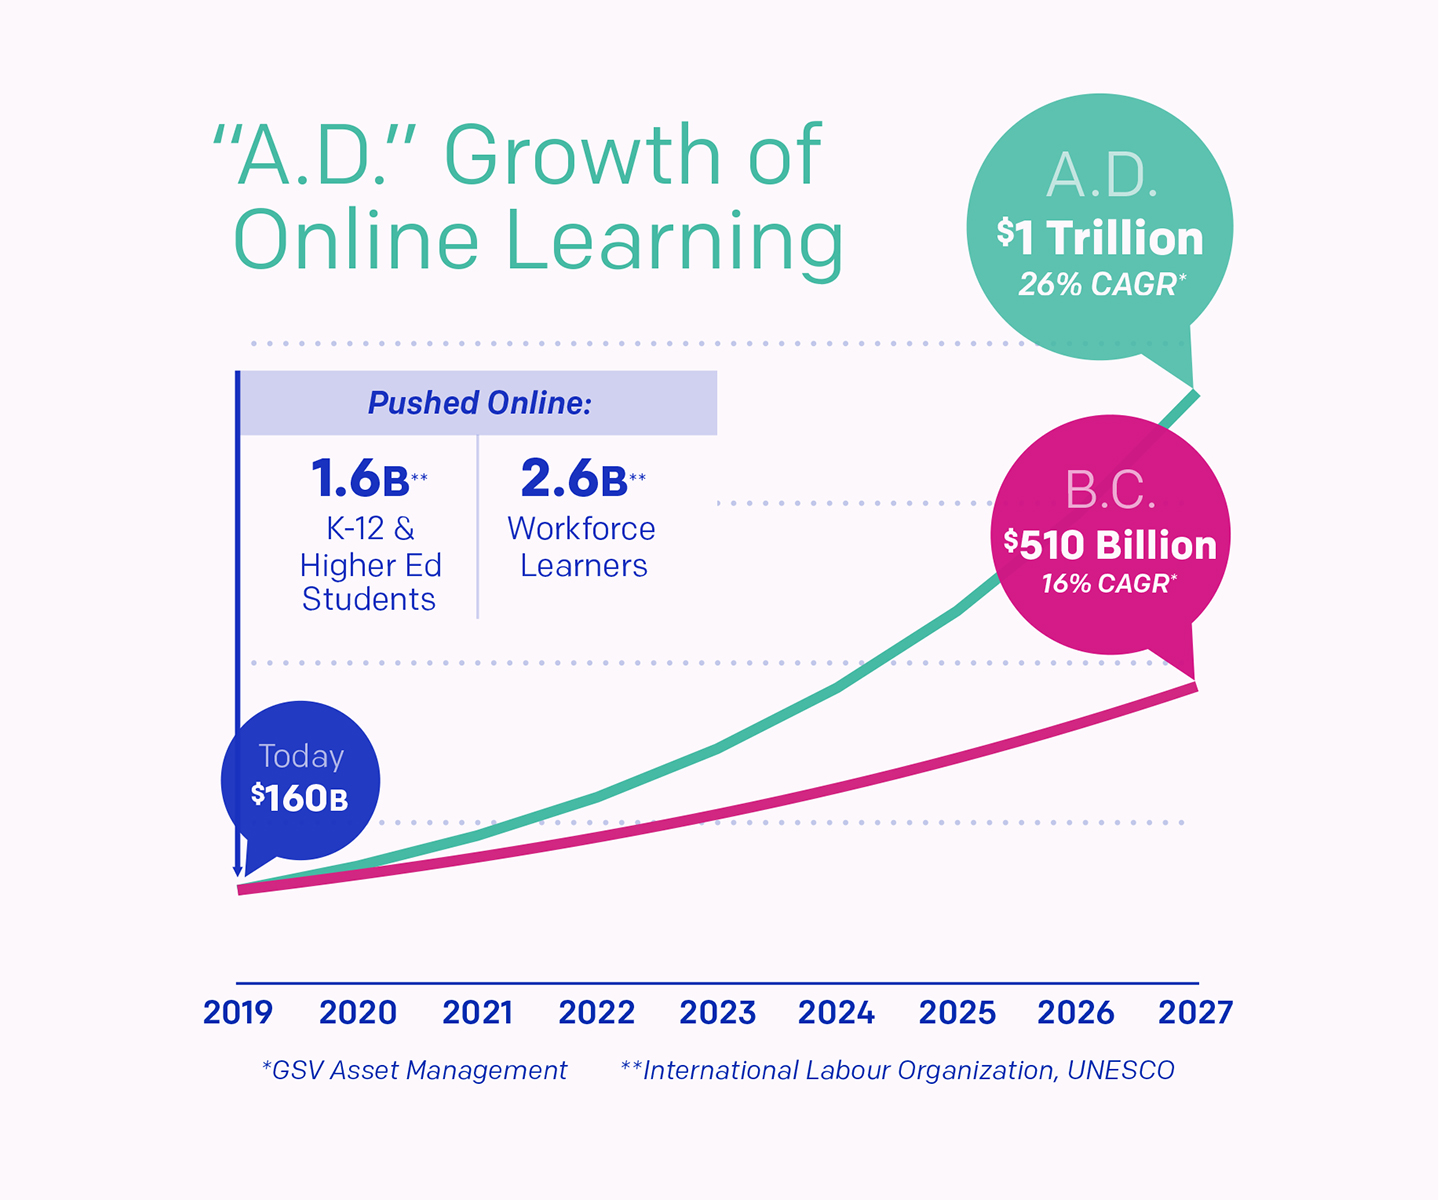 Pandemic-Driven Growth of Digital Learning